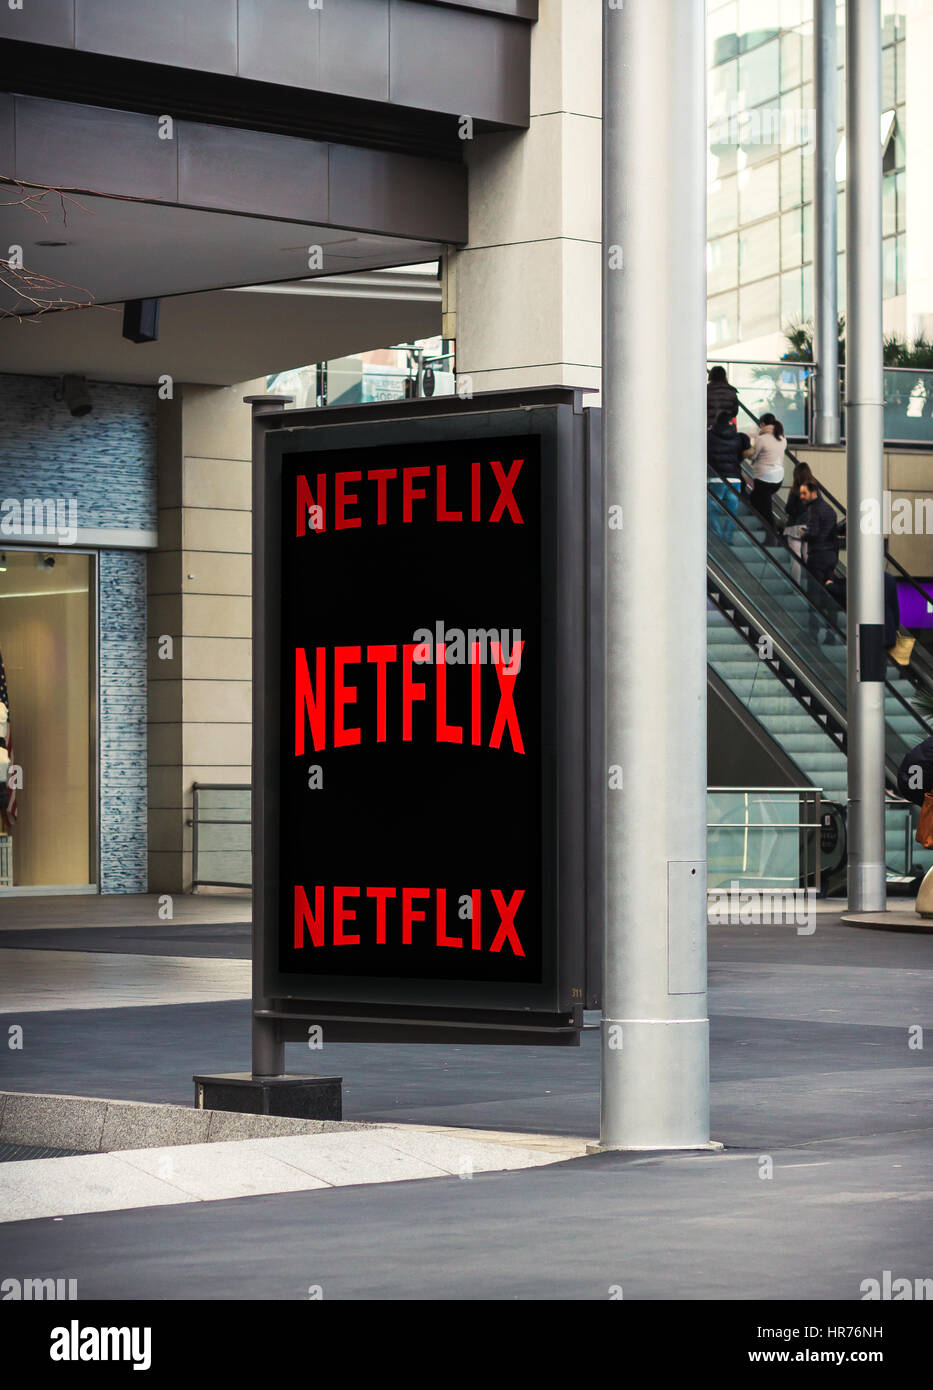 Netflix publicity at Billboard on bus stop, Stock Photo